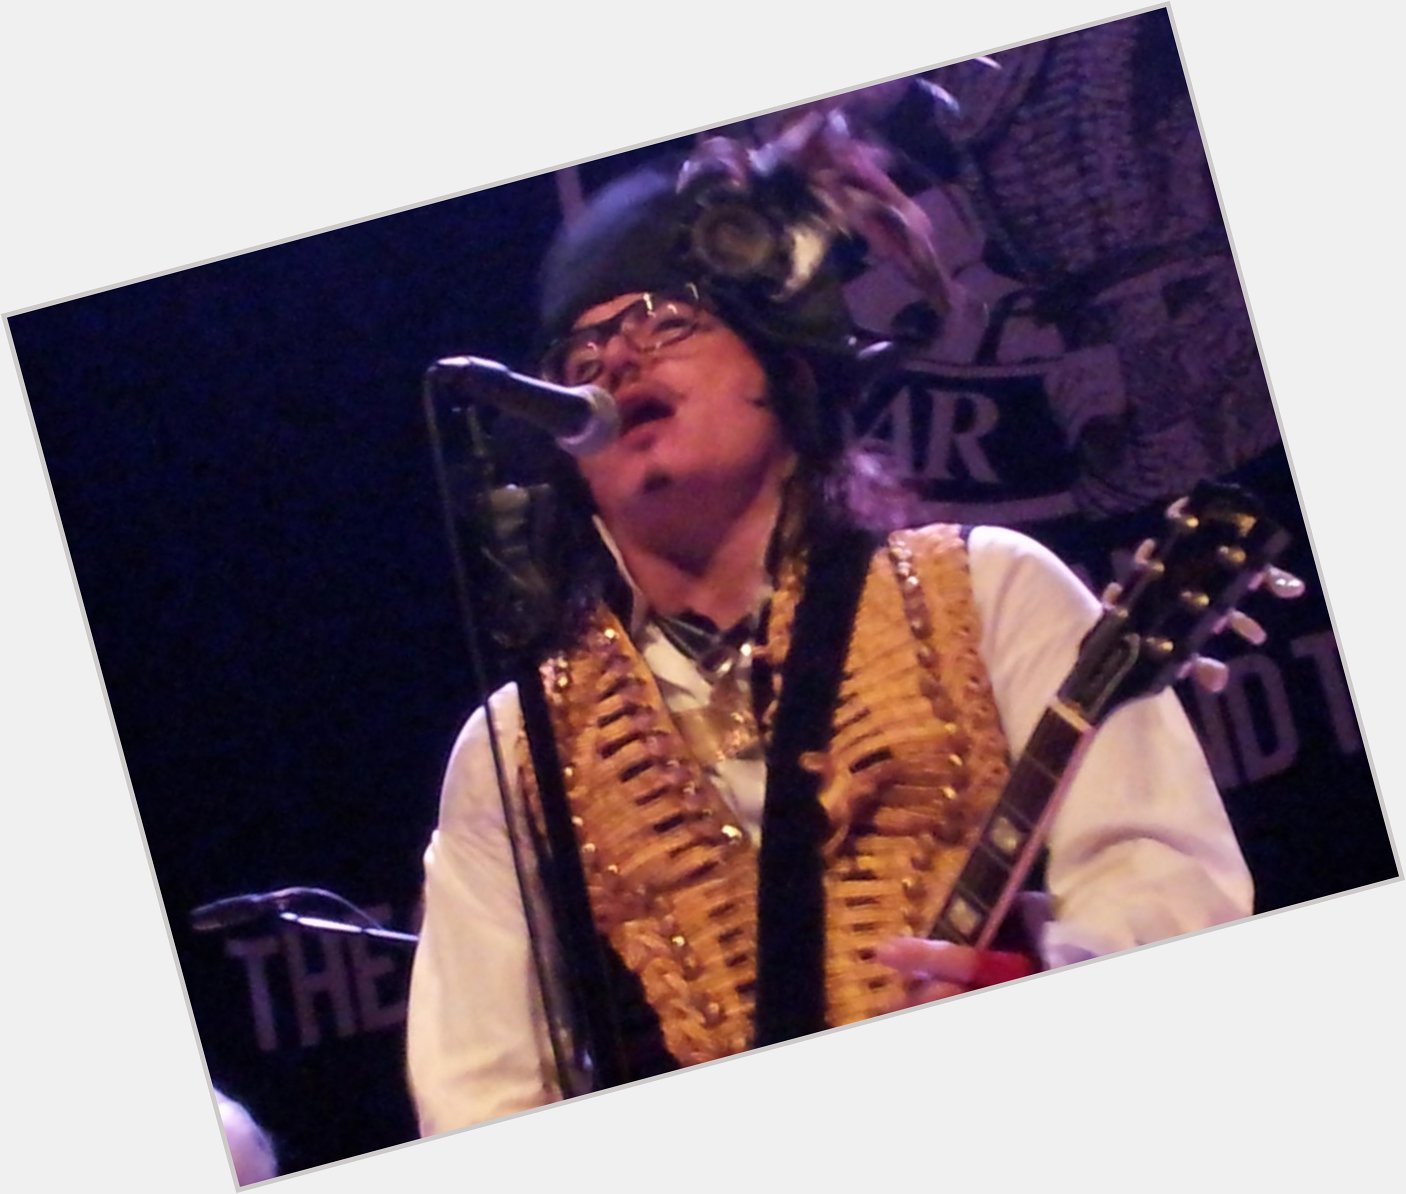 HAPPY 60th BIRTHDAY ADAM ANT!! Love this pic. I cried when he sang Wonderful in Liverpool 2 yrs ago 